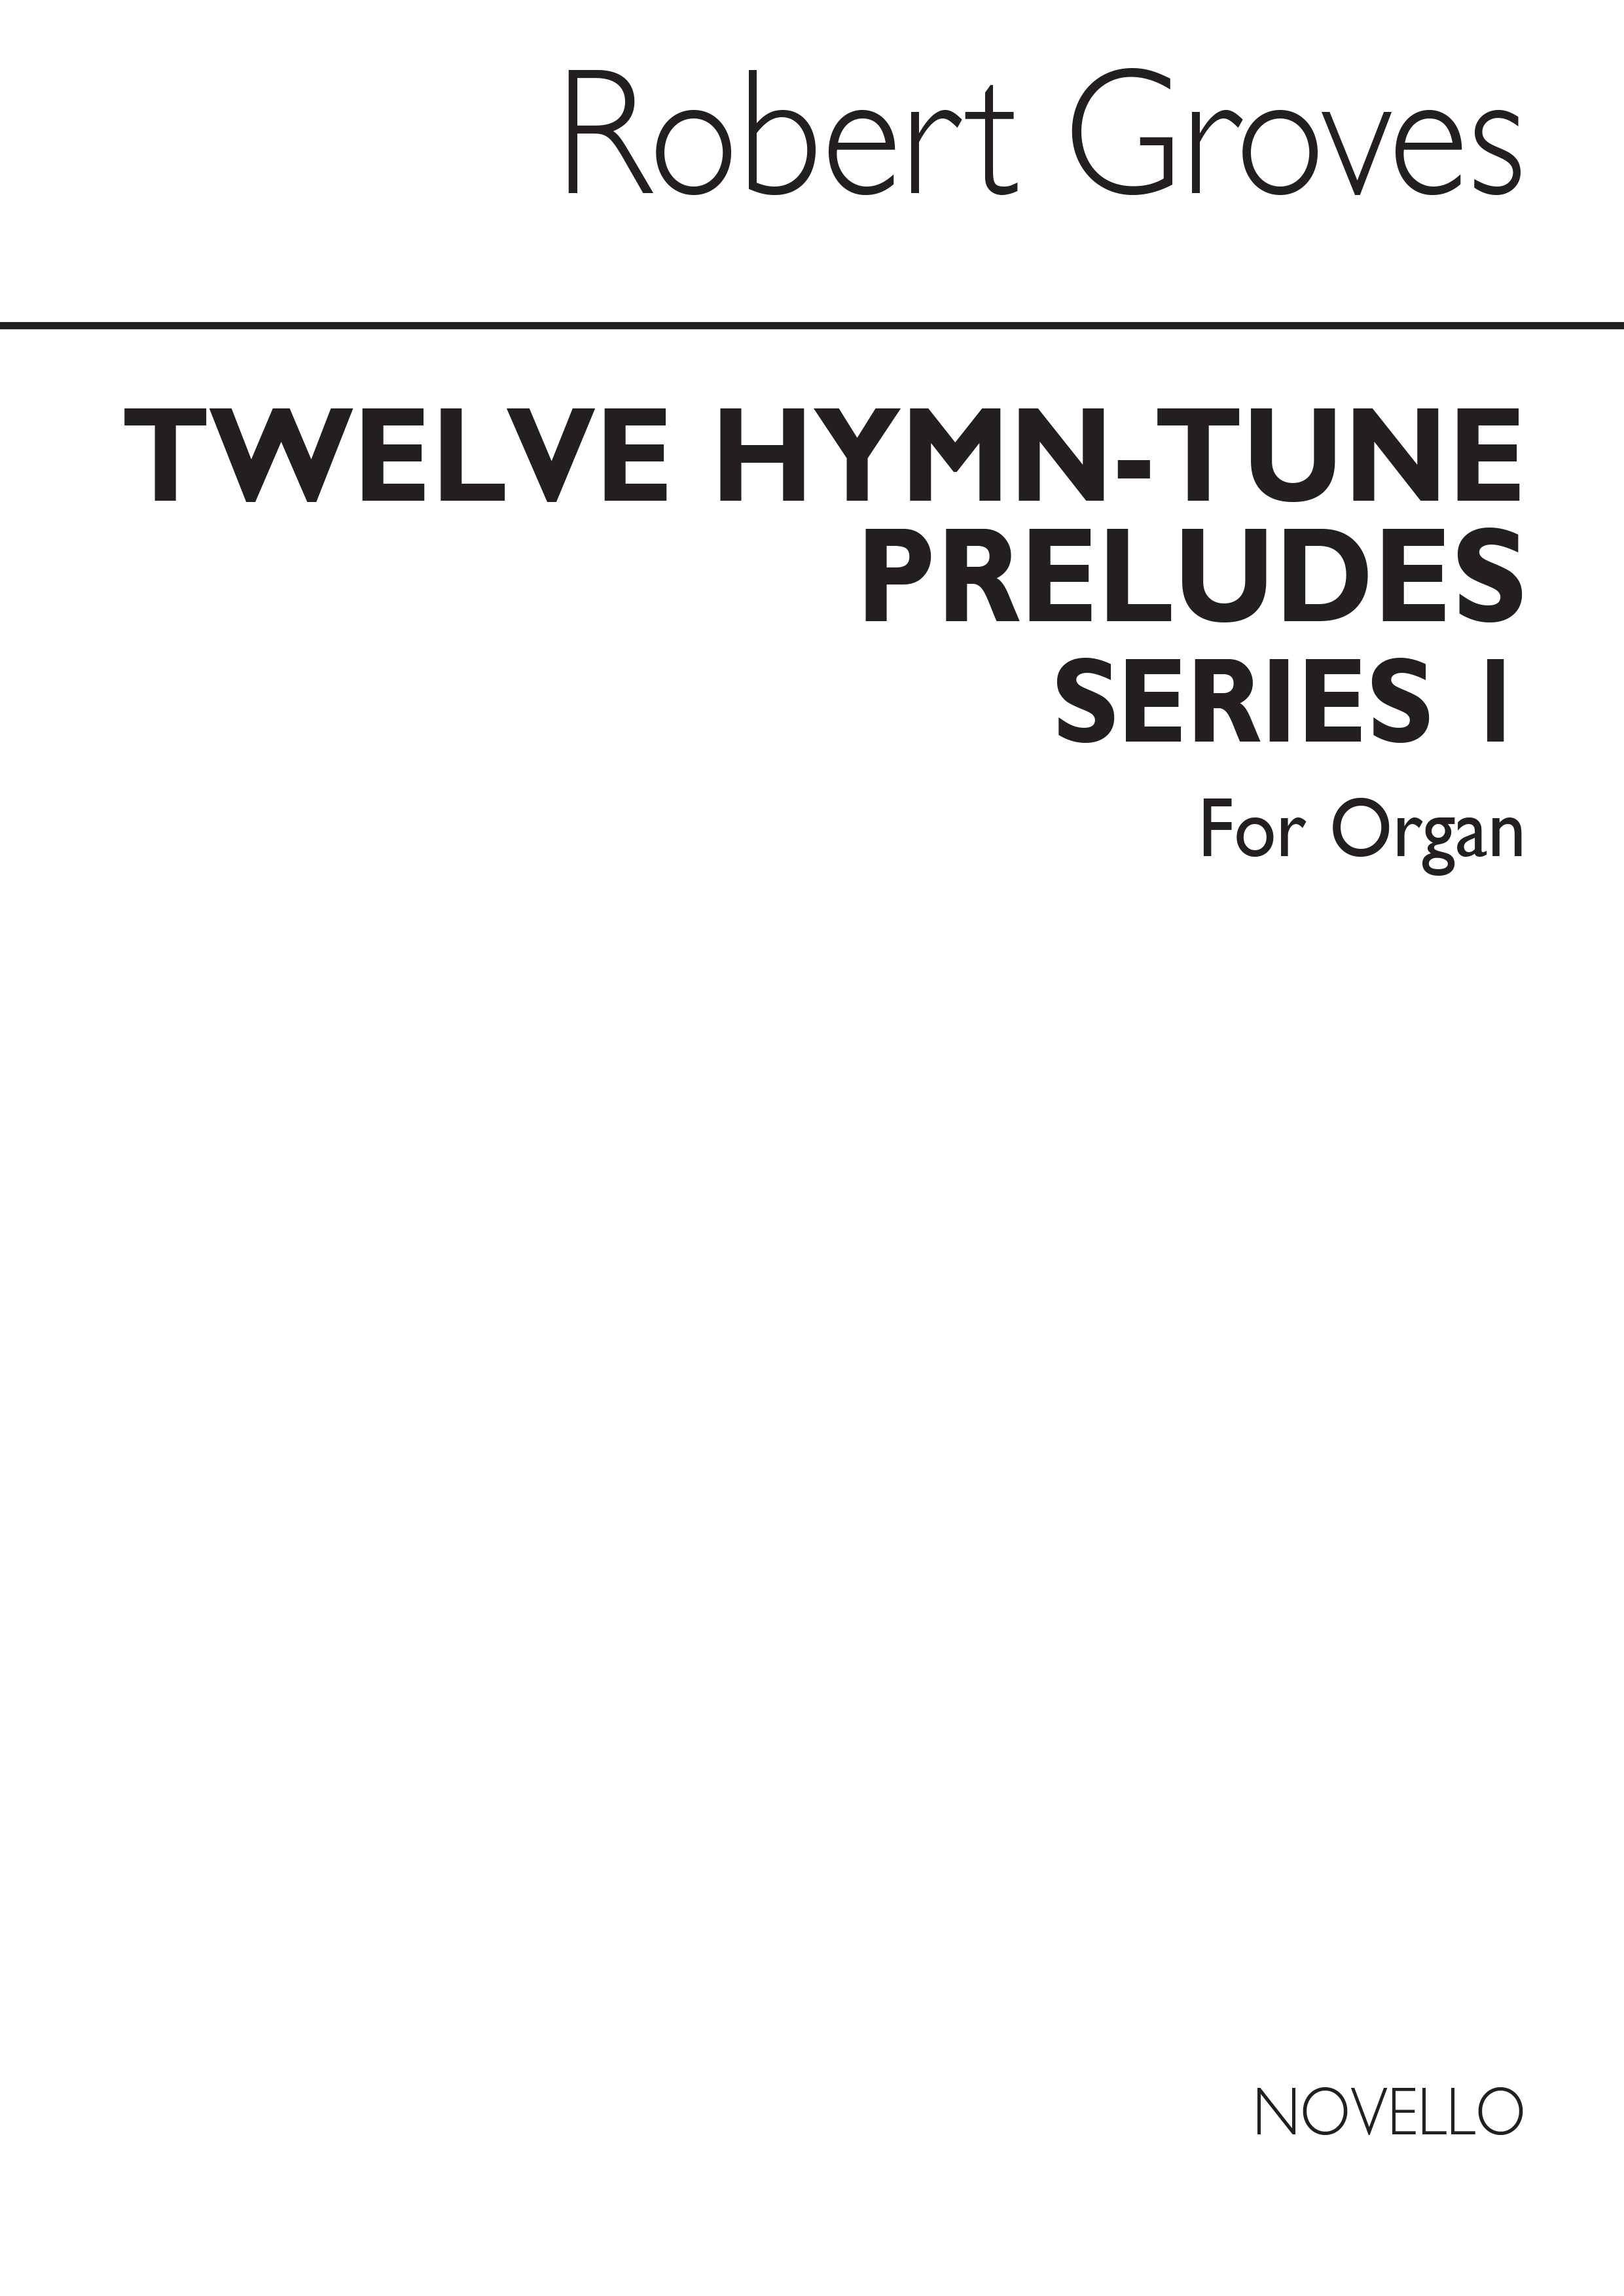 Groves, R 12 Hymn-tune Preludes Series 1 Organ With Or Without Pedals